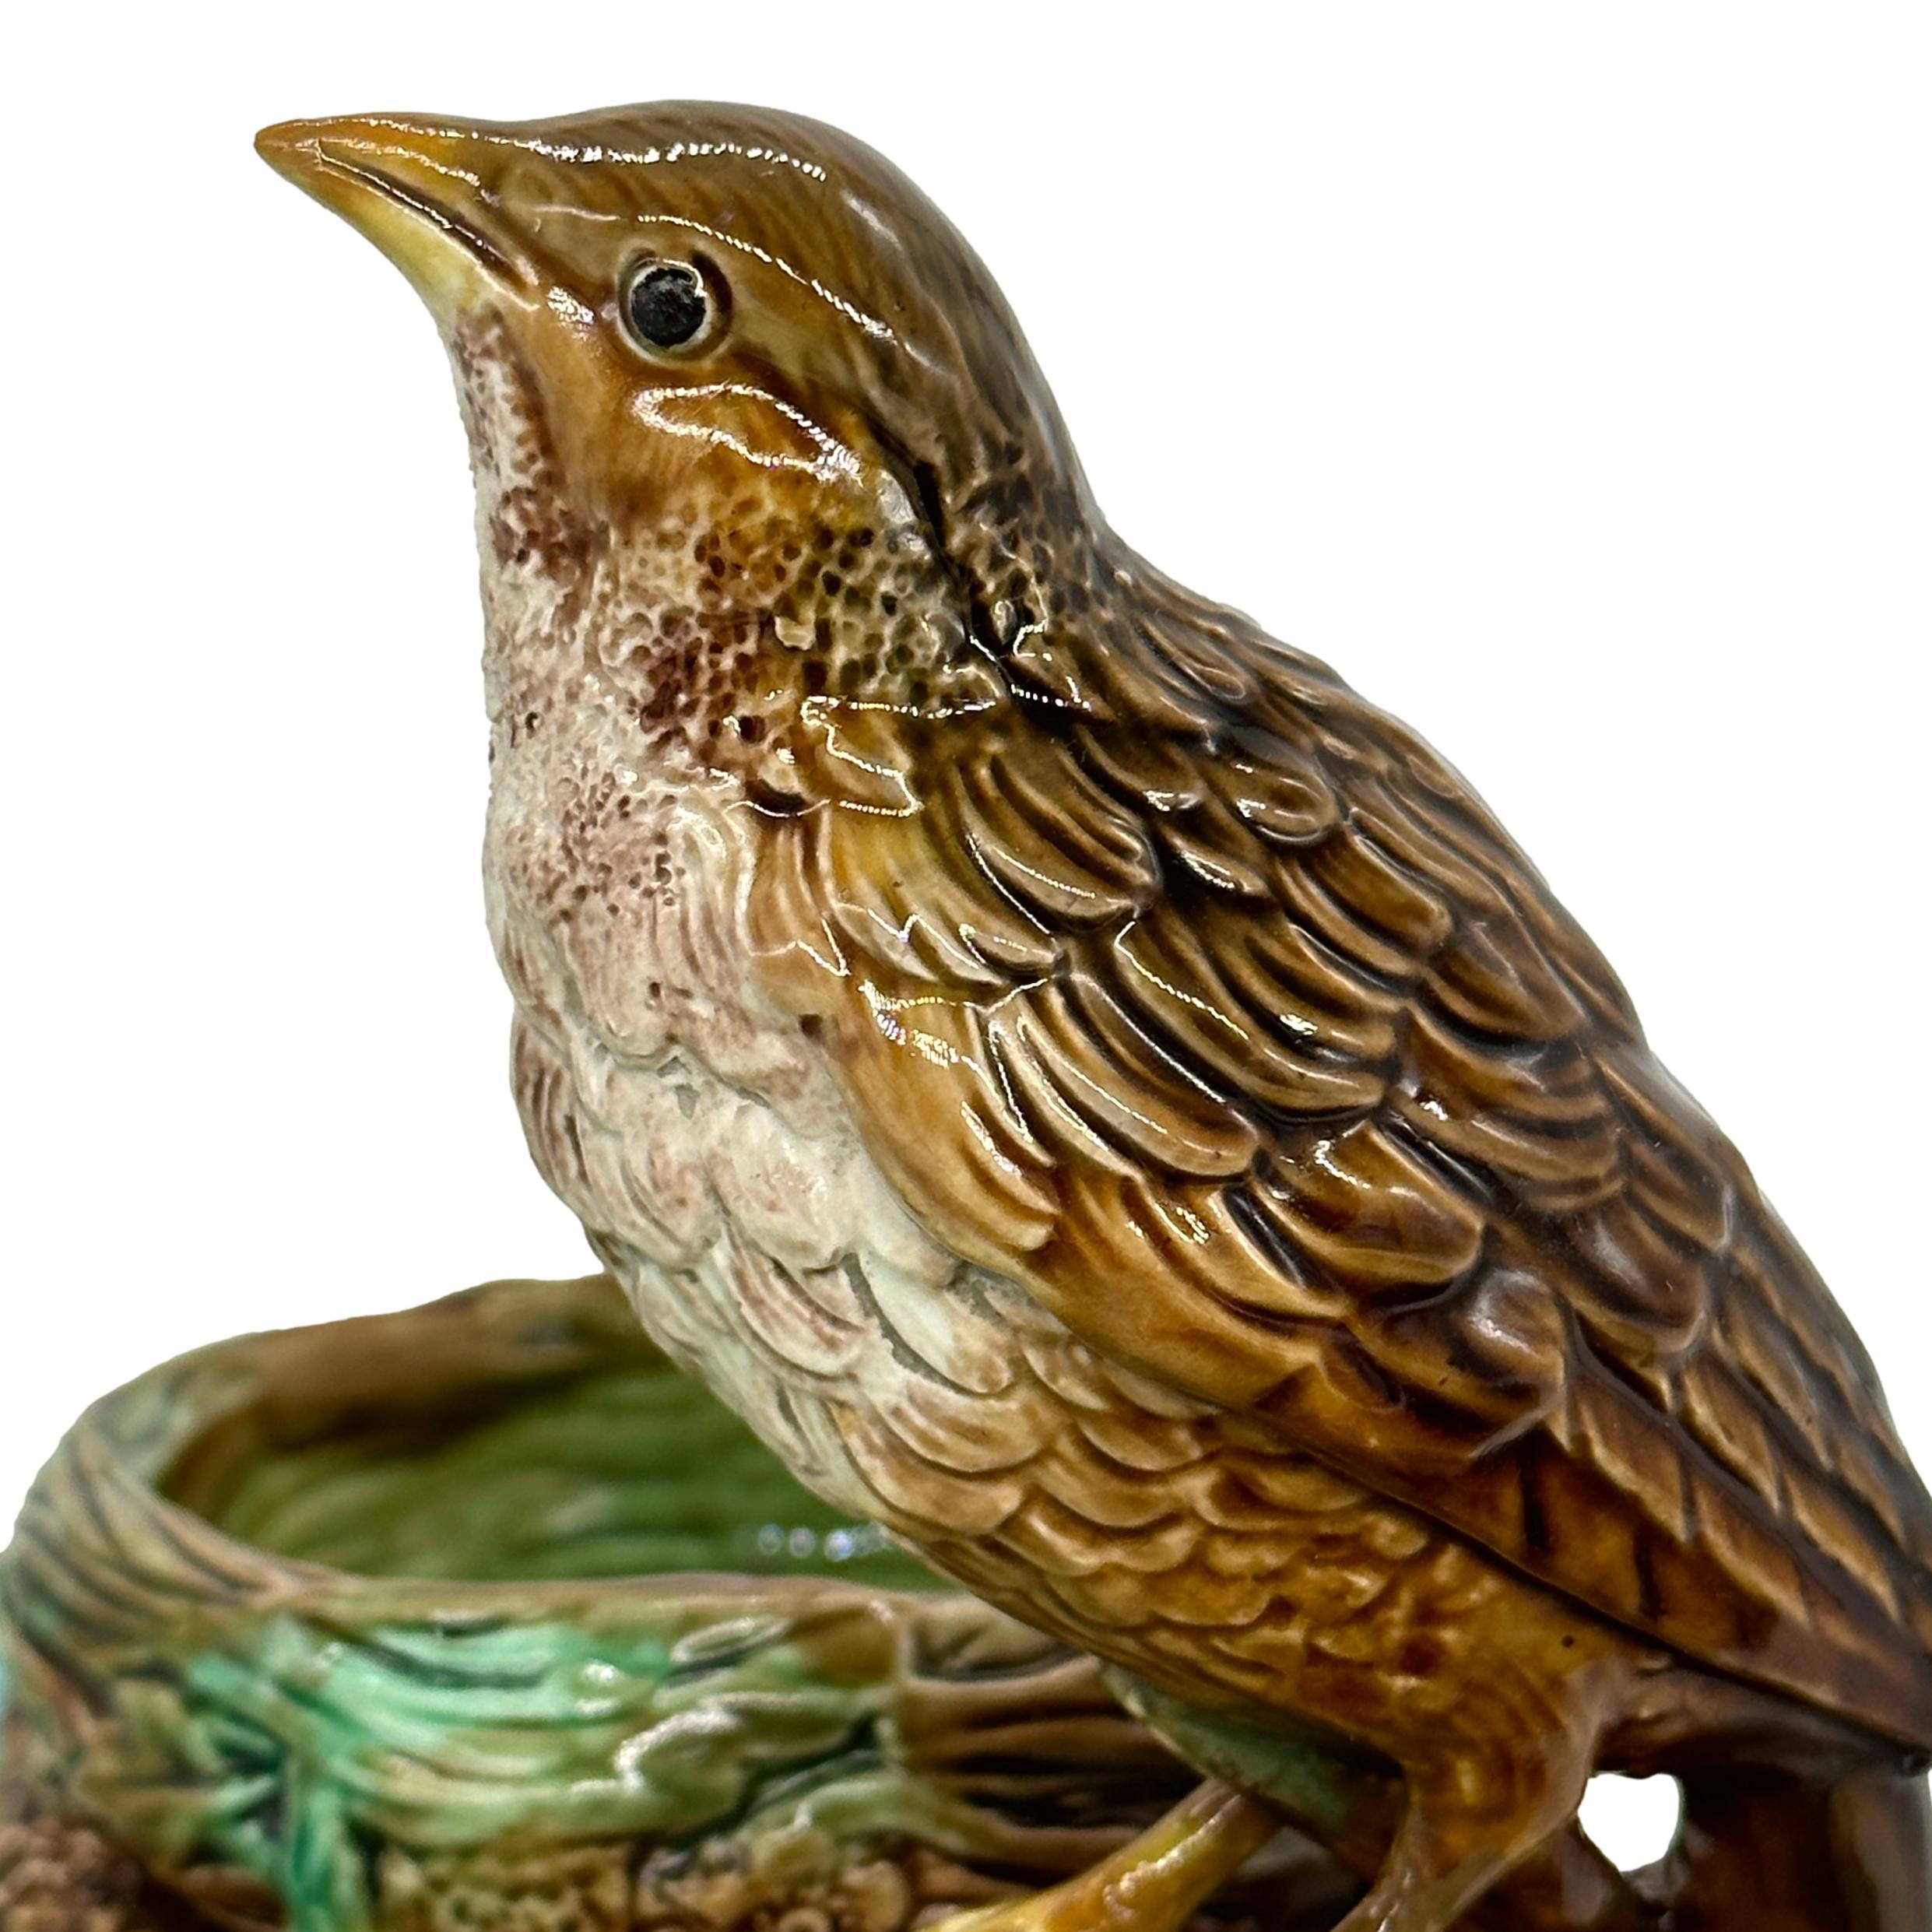 George Jones Majolica Strawberry Server Mounted by a Bird, English, circa 1870 For Sale 5